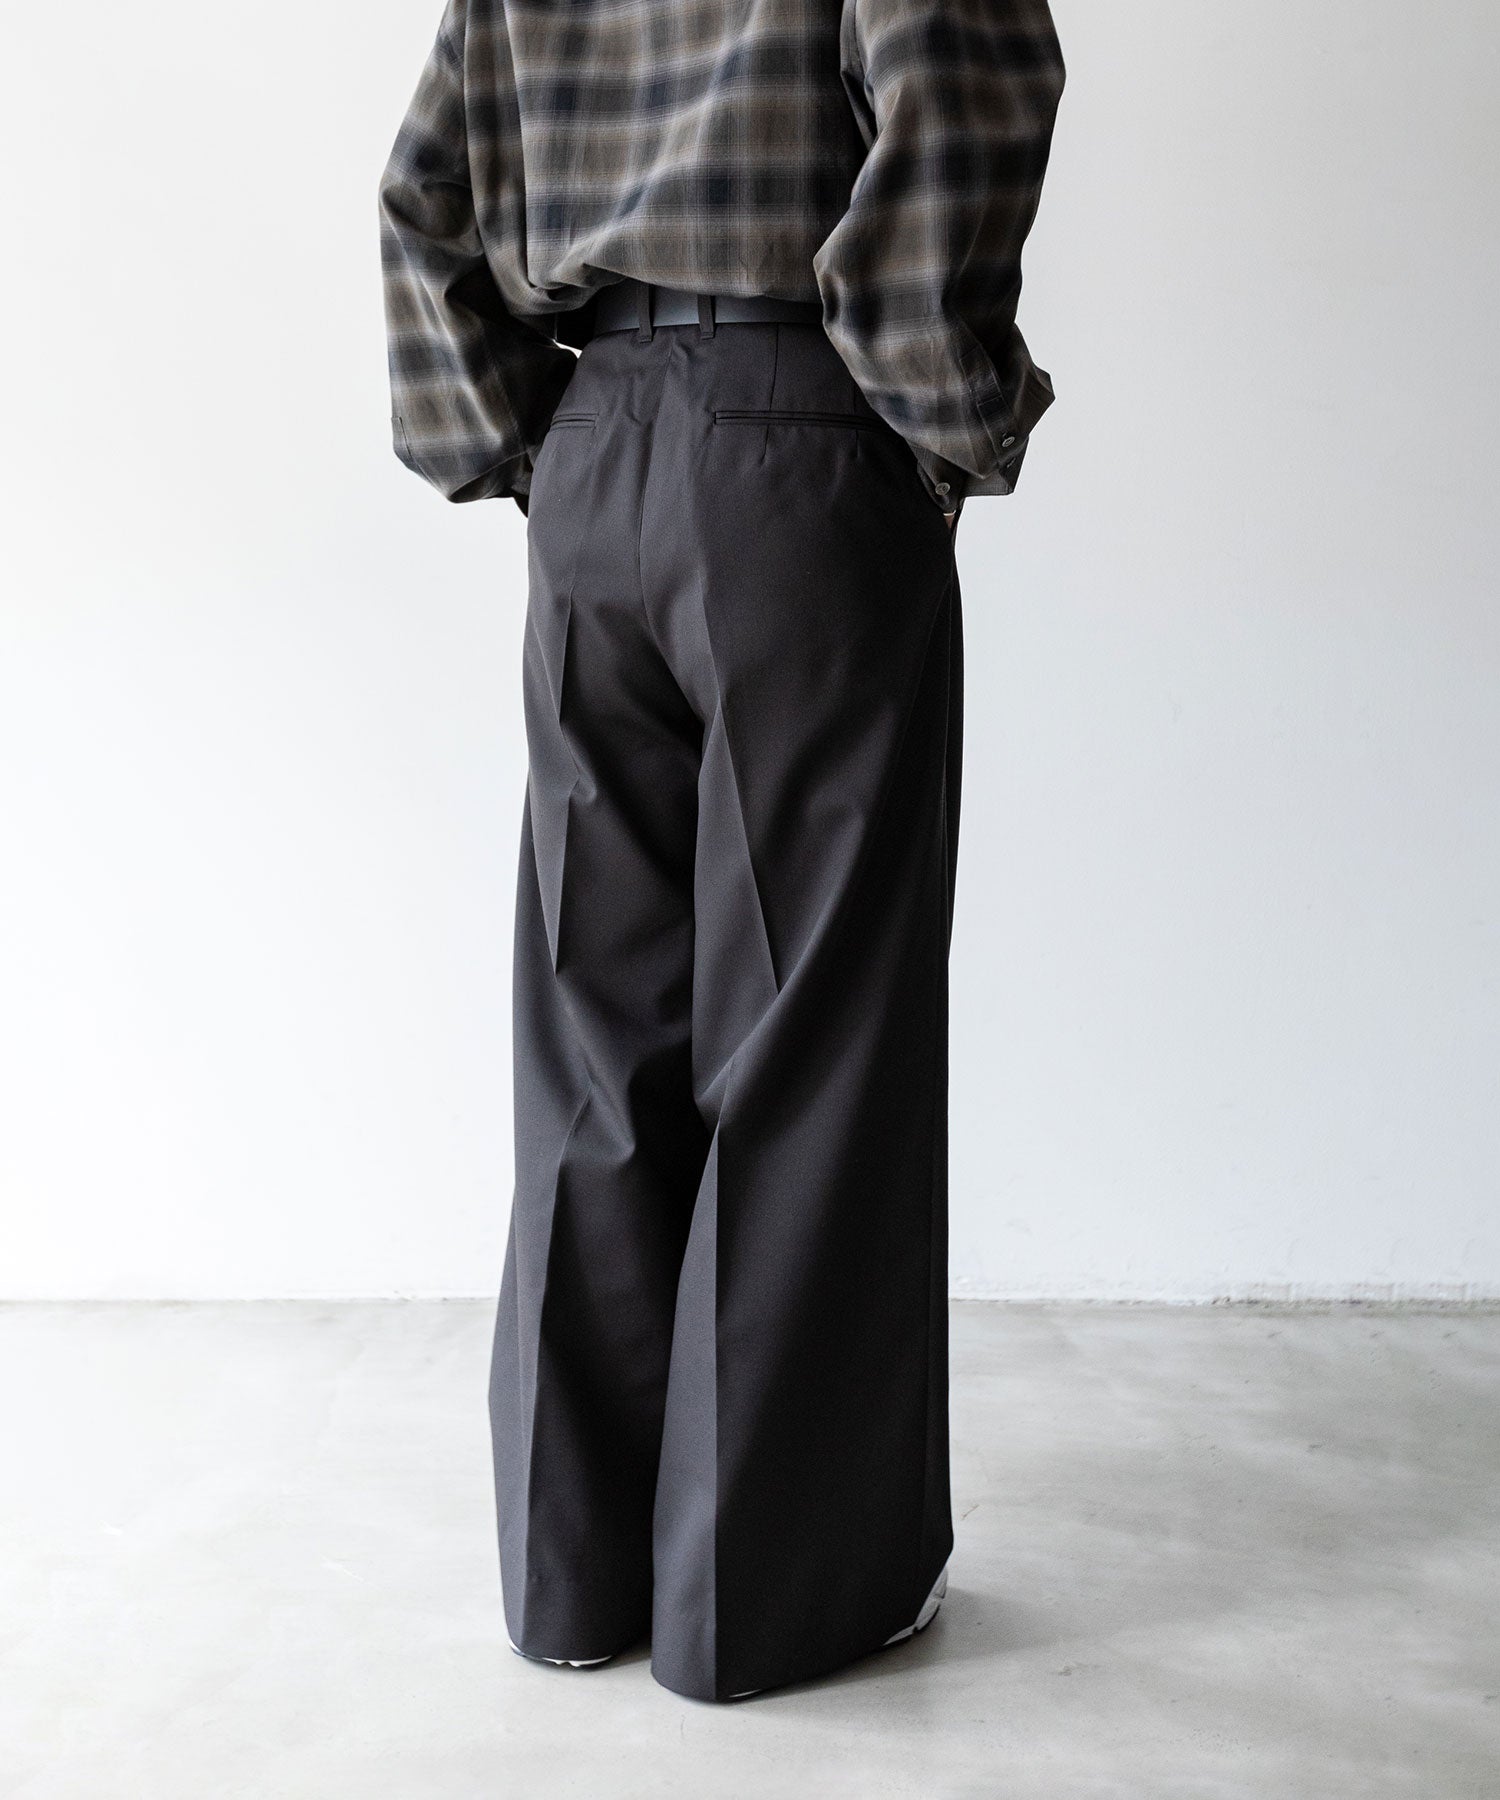 stein】EXTRA WIDE TROUSERS - DARK CHARCOAL | 公式通販サイト 